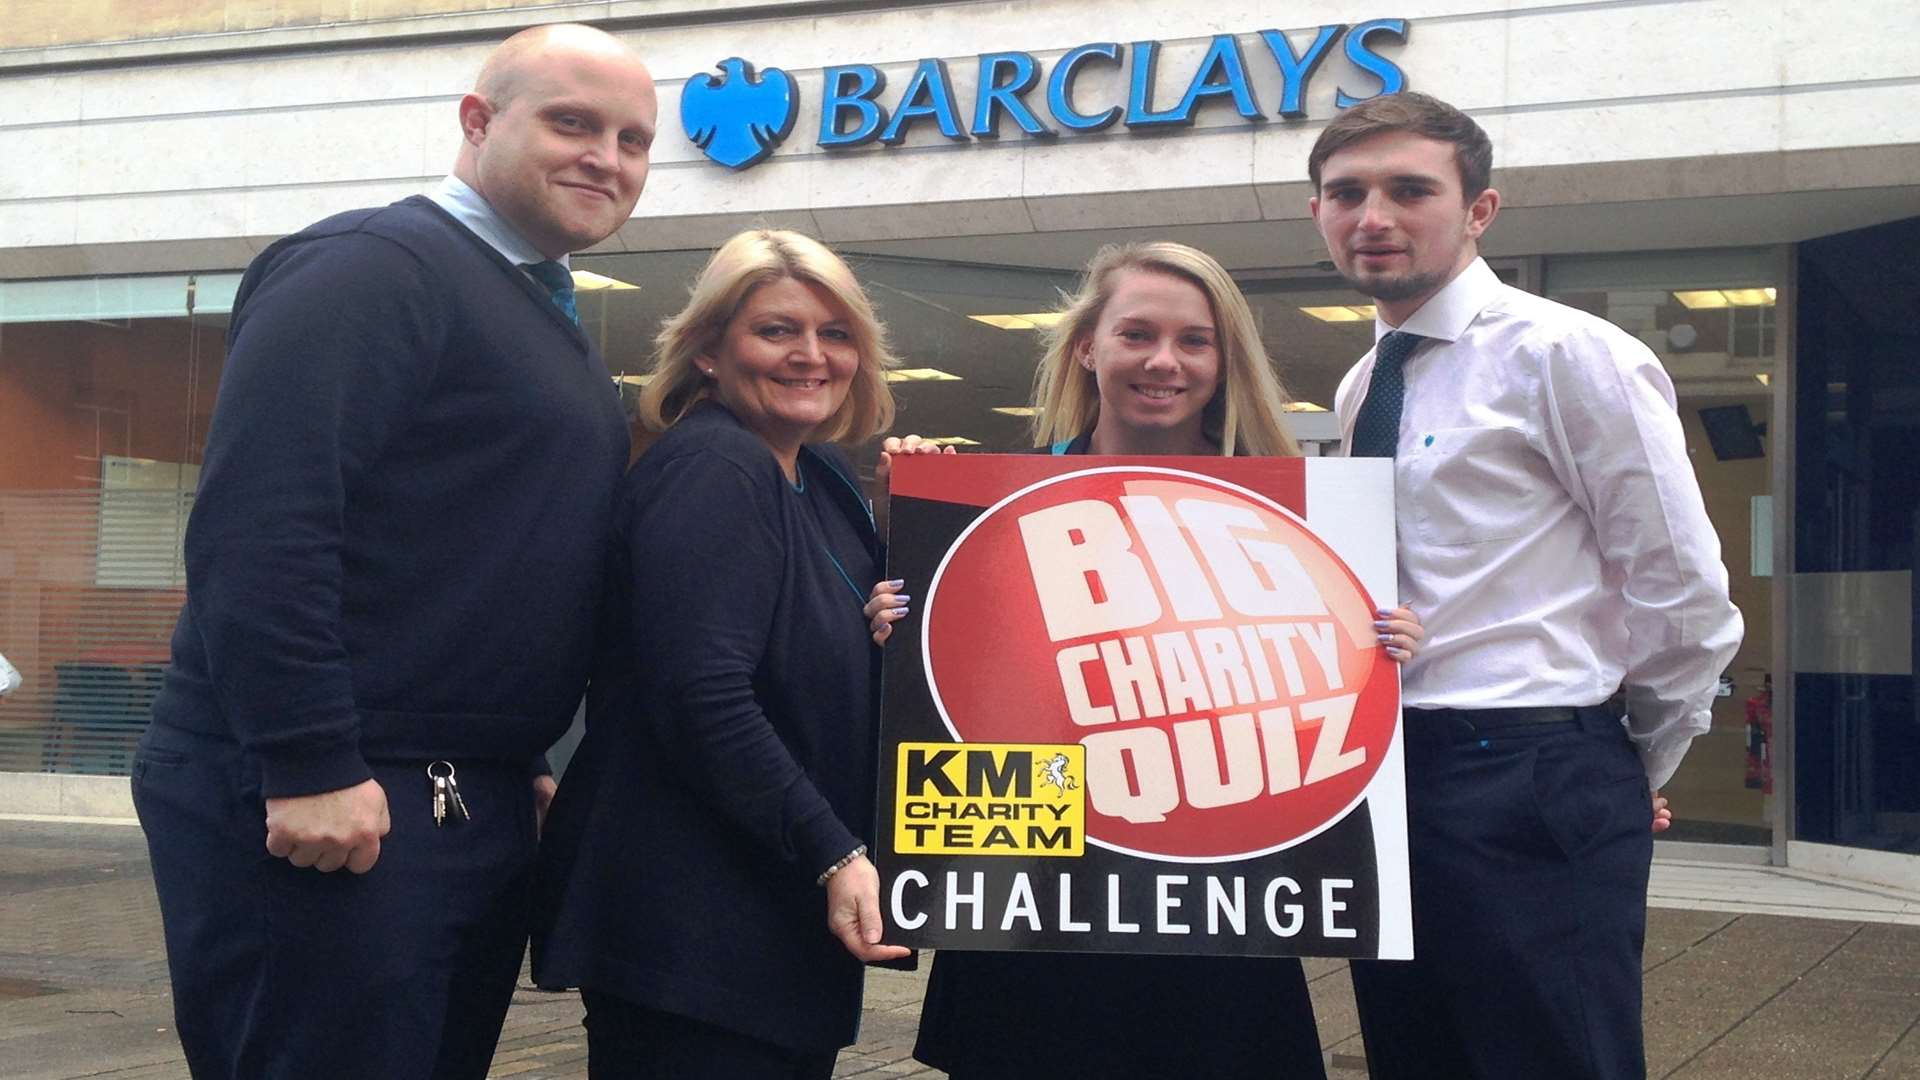 Sam Russell, Canterbury market leader for Barclays, with colleagues Maria Smith, Shay Bartlett and Joseph Mulla celebrating Barclays' support of the Canterbury Big Quiz being staged on April 24.